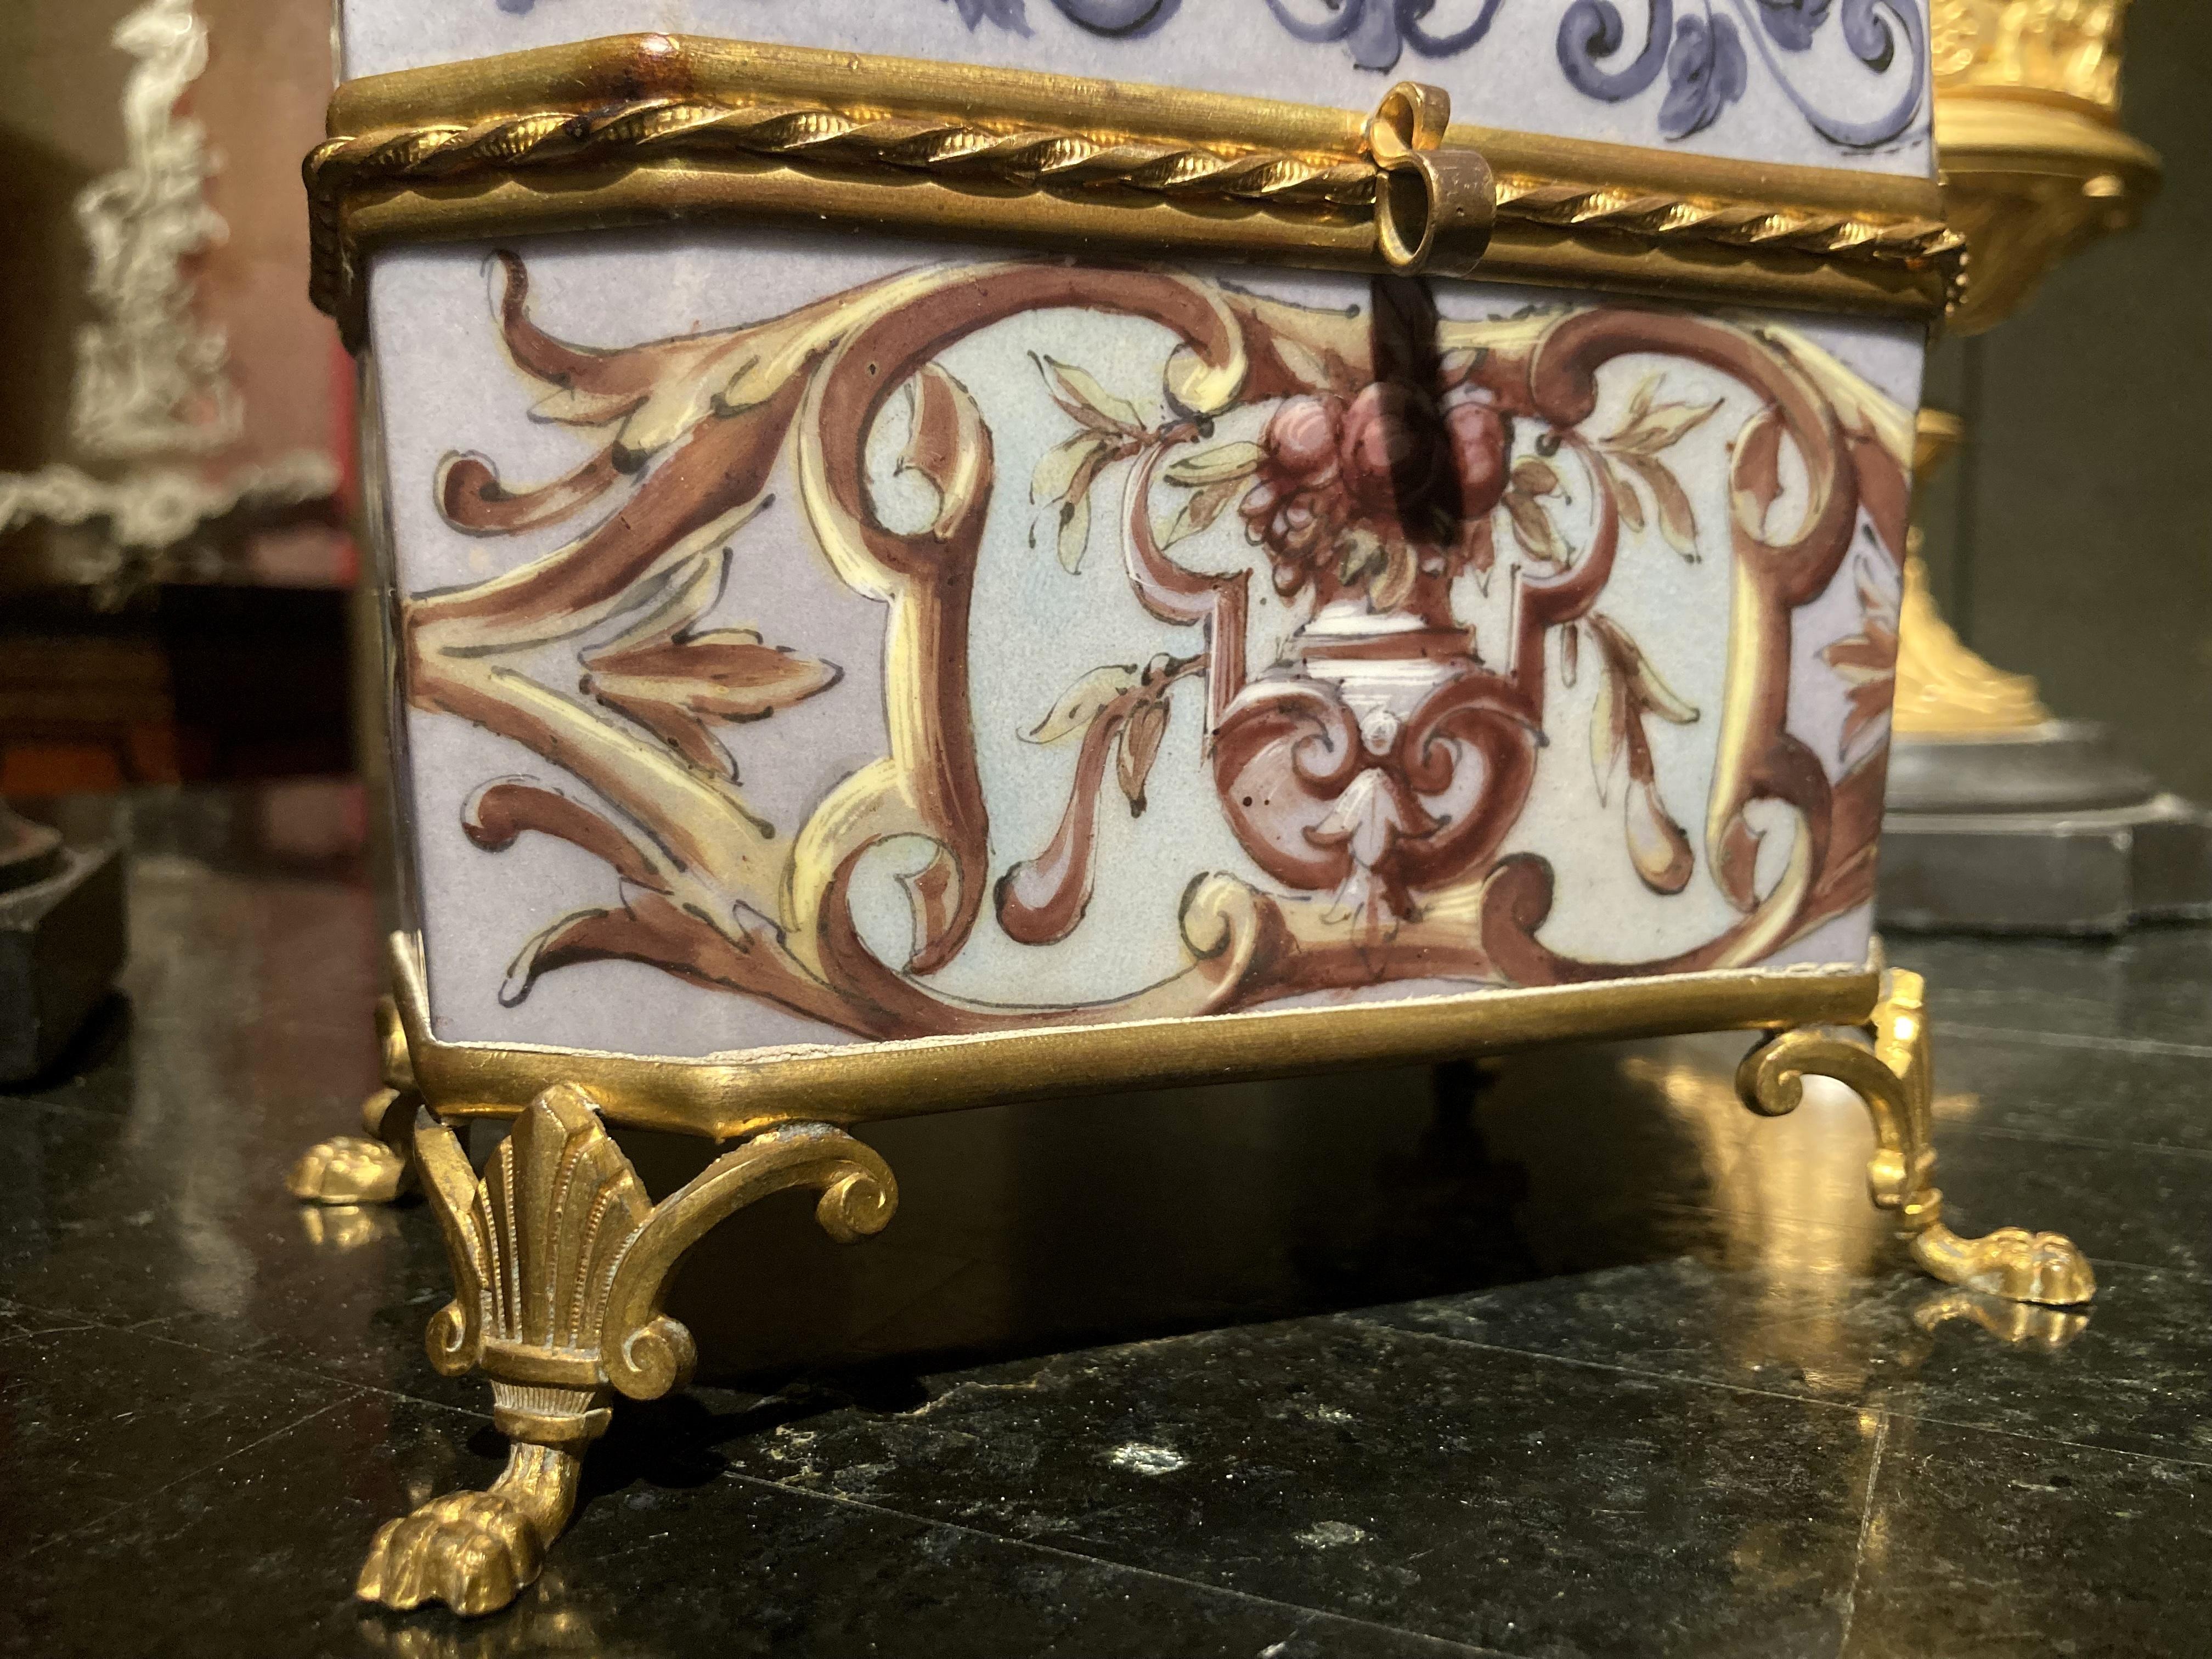 French 19th Century Empire Porcelain and Gilt Bronze Decorative Jewelry Box For Sale 3